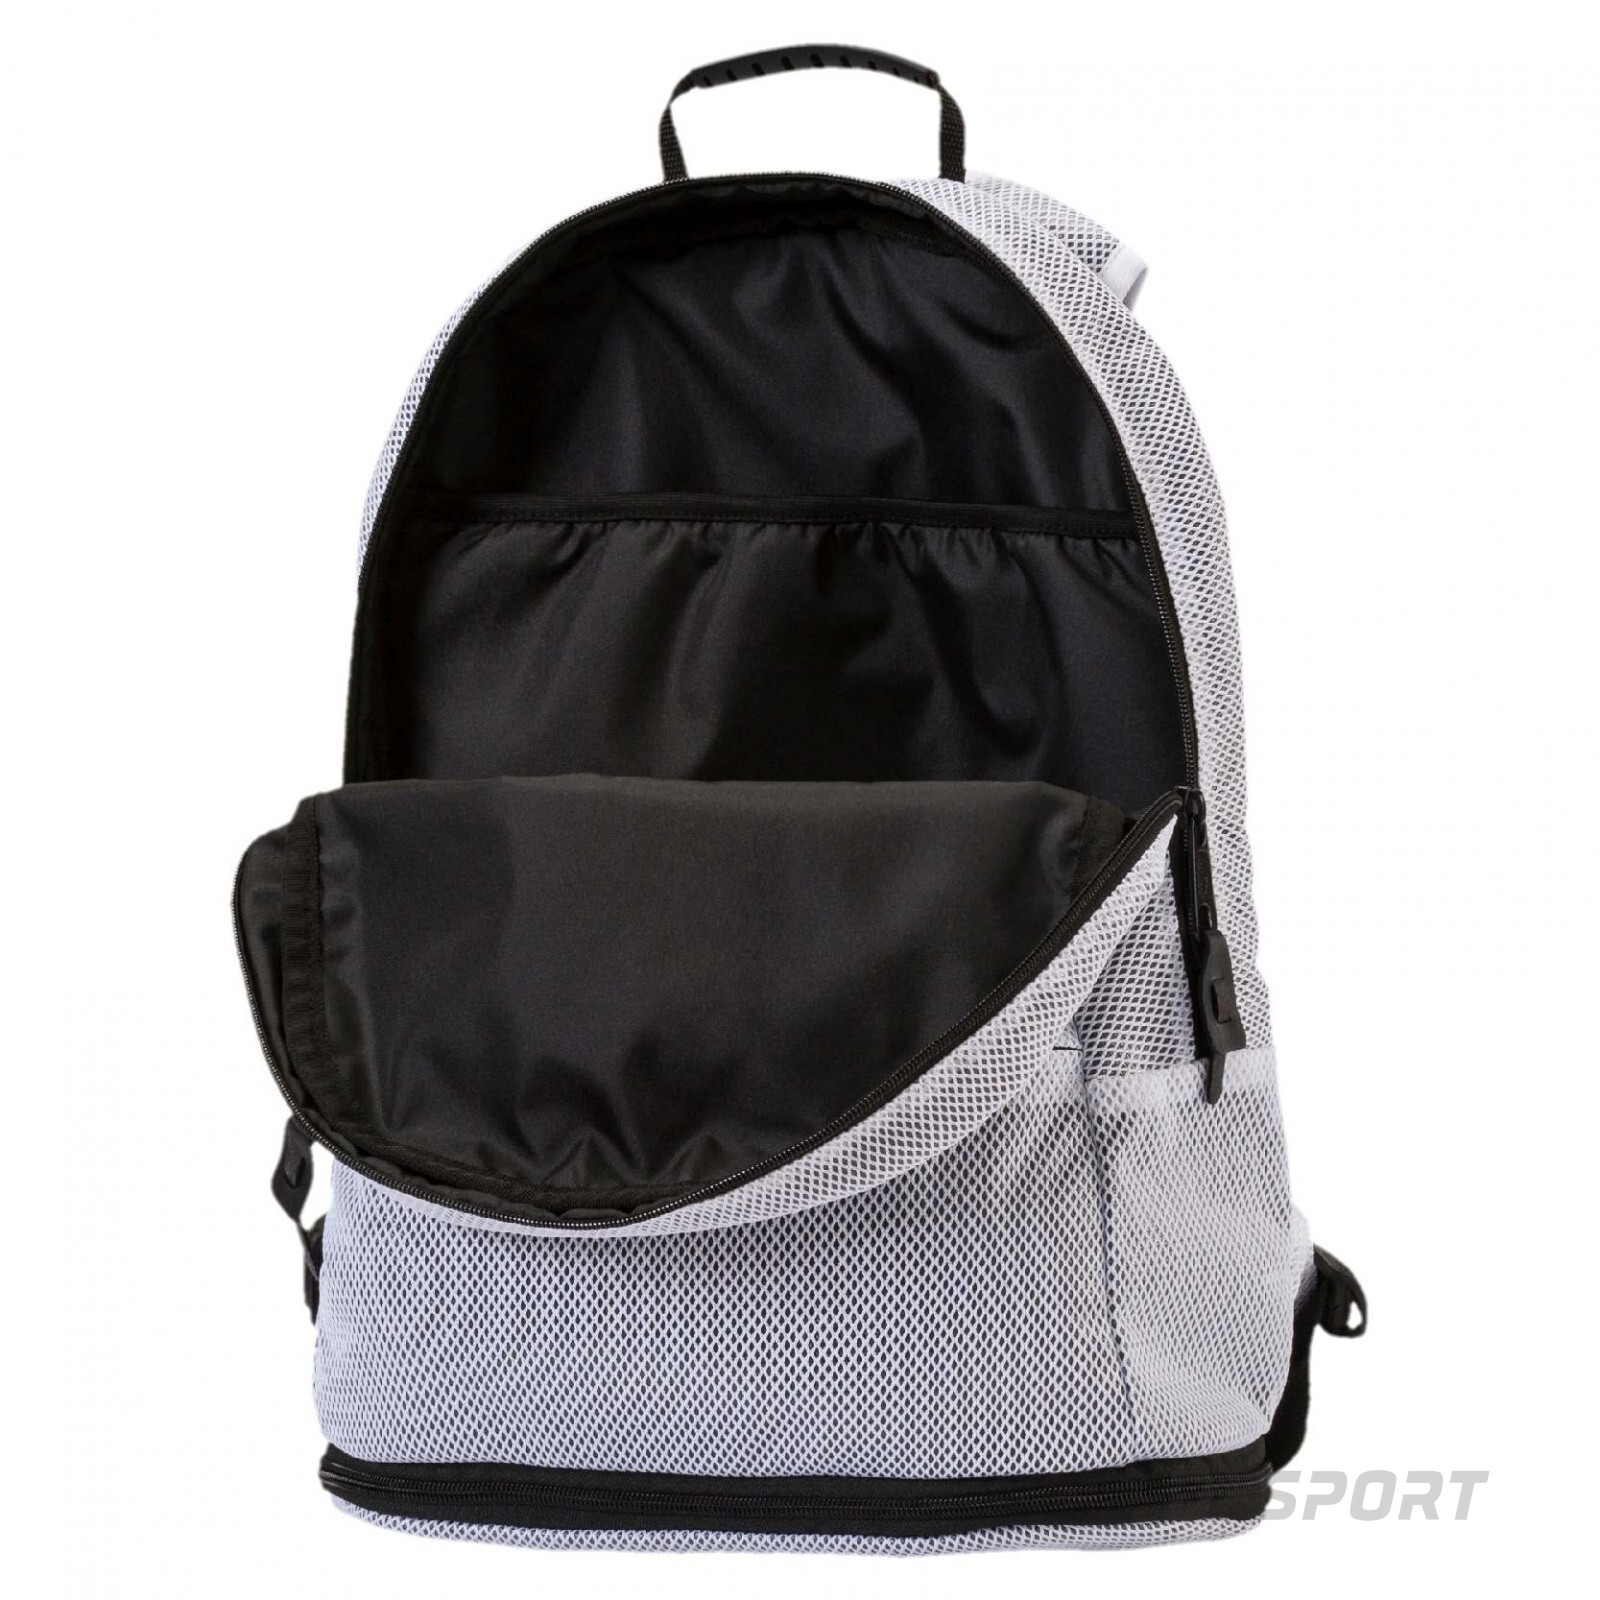 Puma Pace Zip-out Backpack Pum